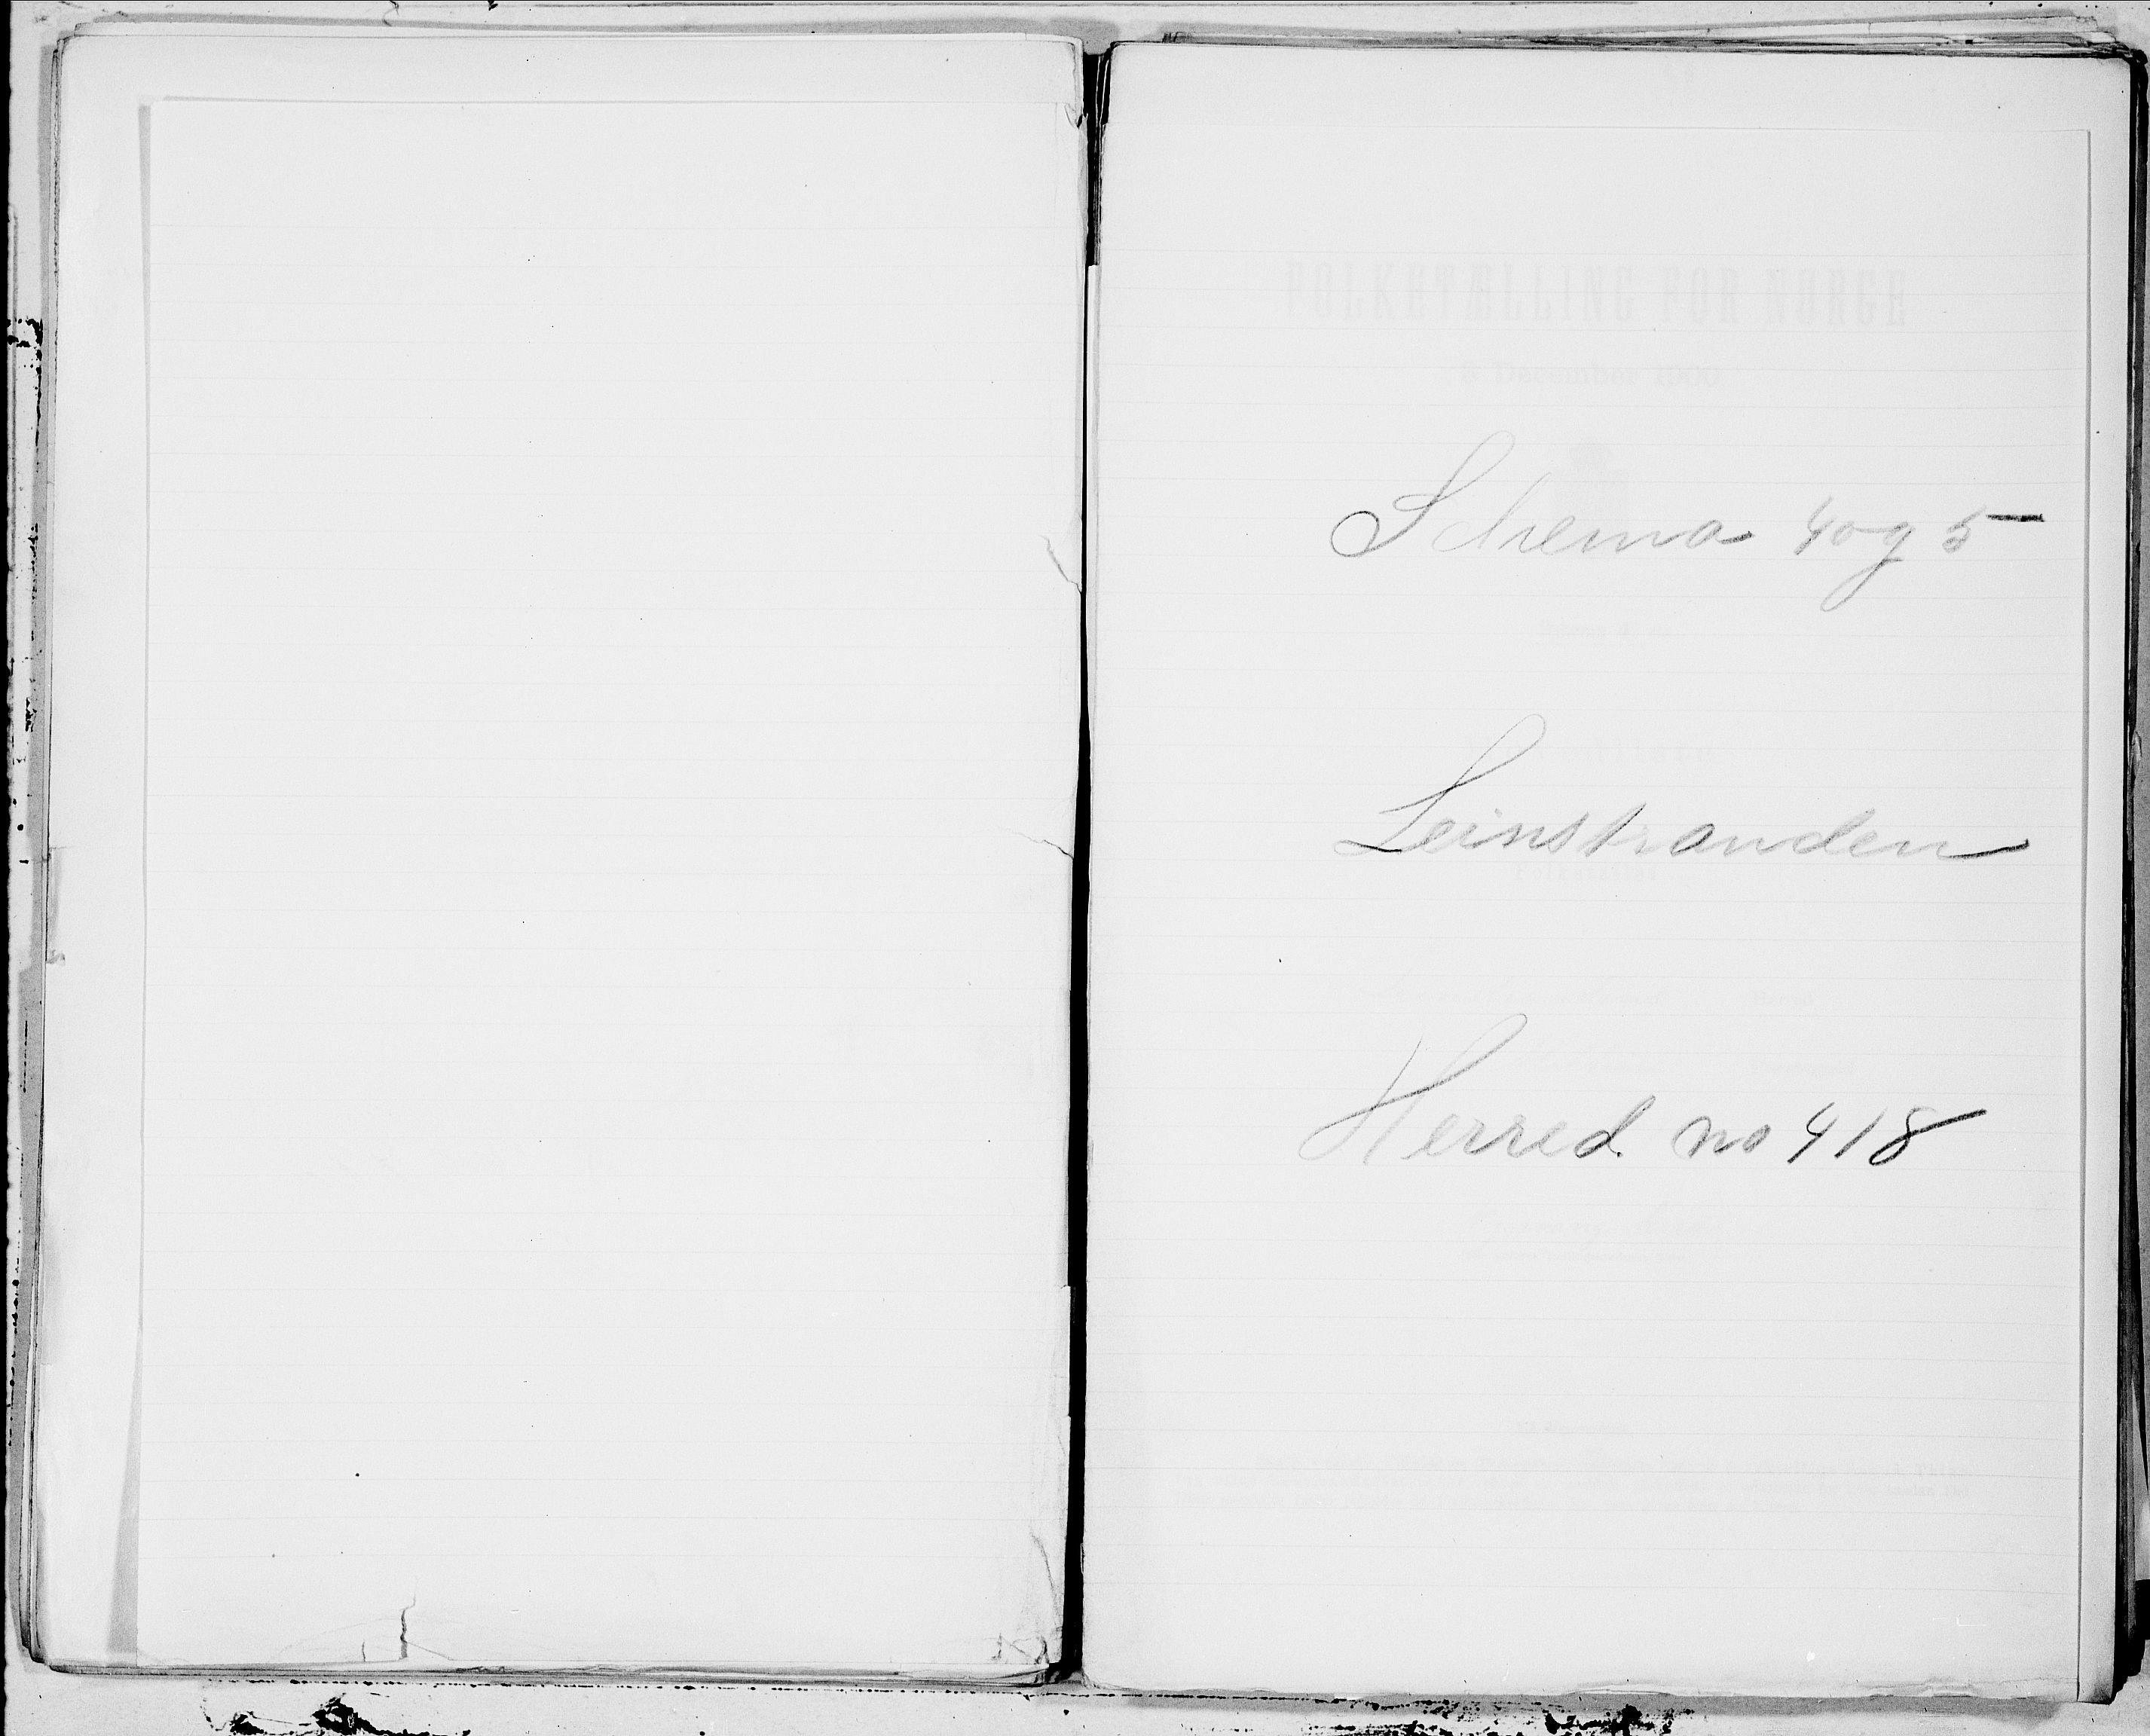 SAT, 1900 census for Leinstrand, 1900, p. 1